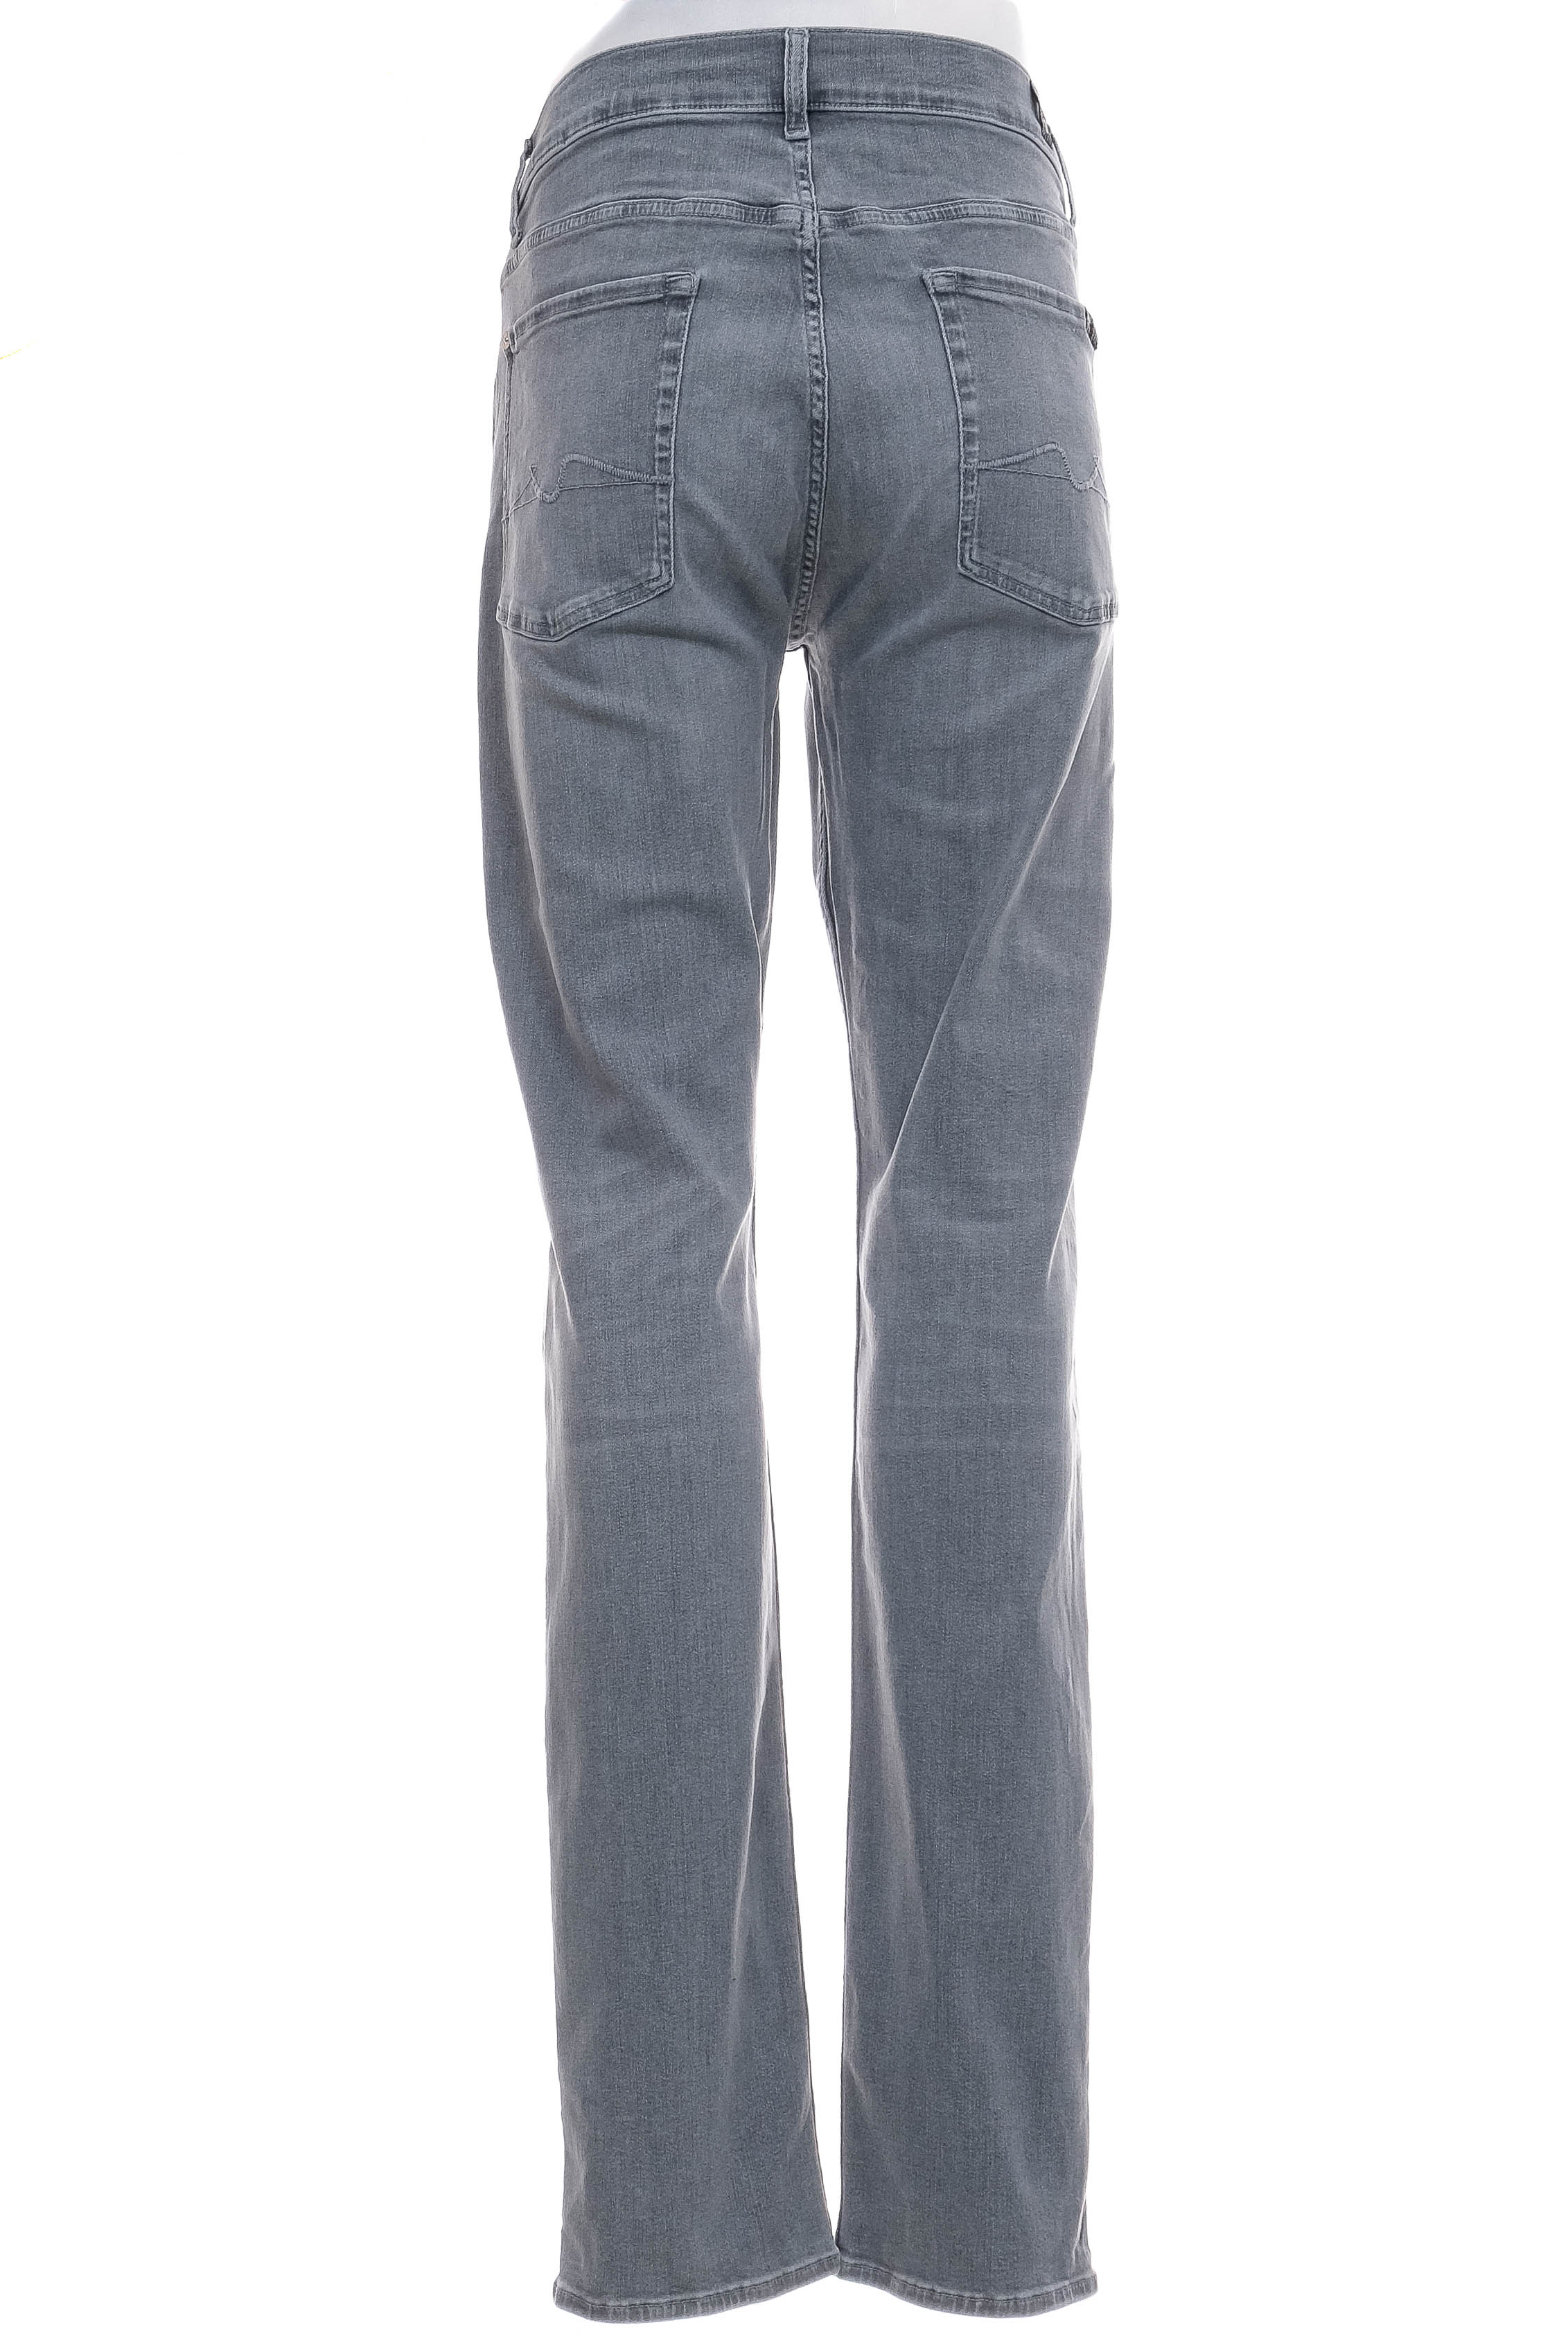 Men's jeans - 7 For All Mankind - 1